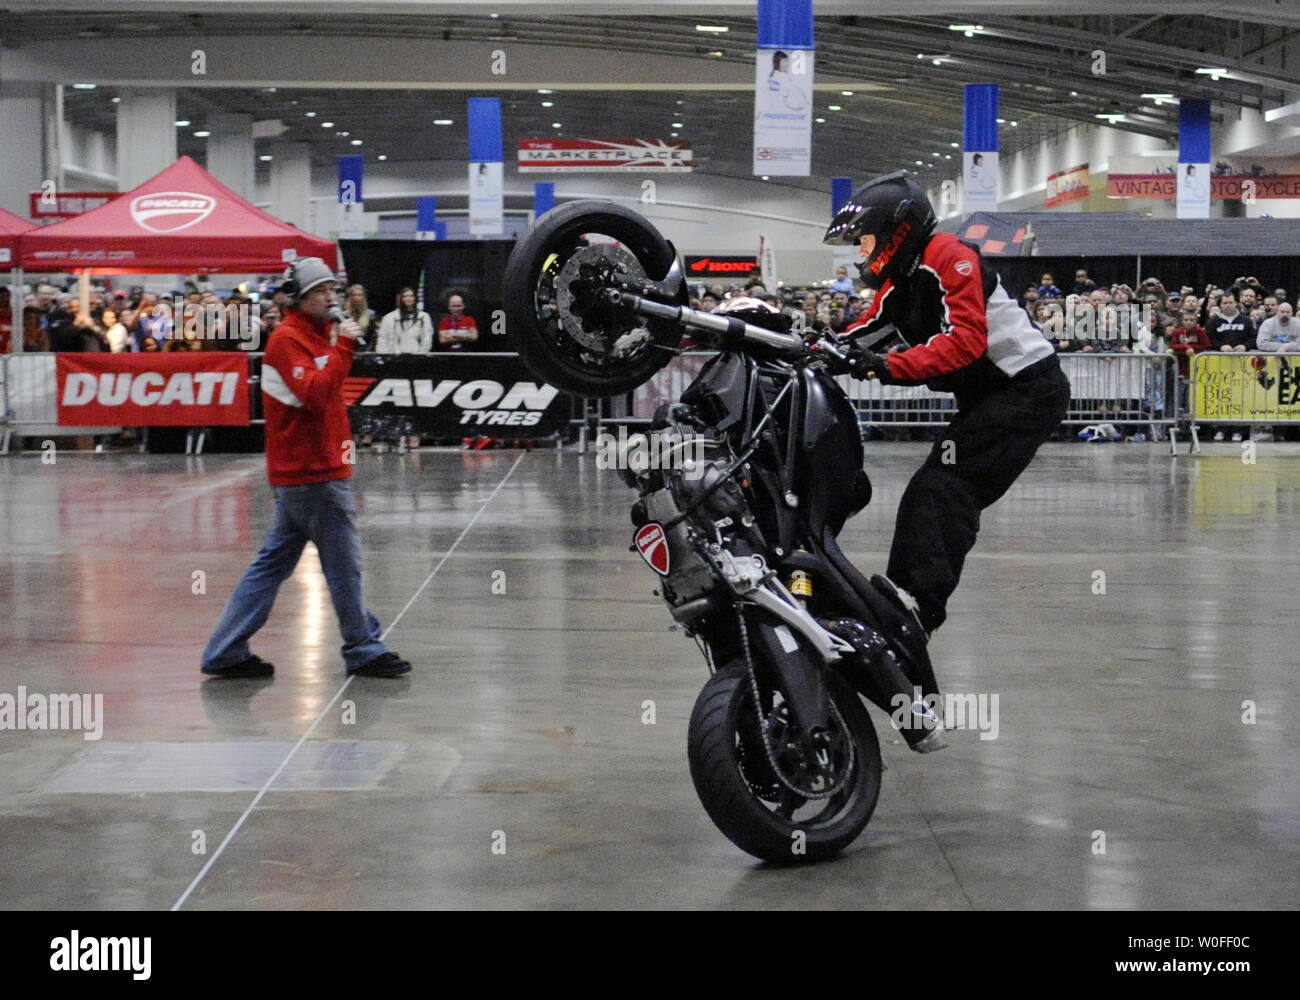 Freestyle Champion Nick "Apex" Brocha performs at the 29th Annual Cycle  World International Motorcycle Show in Washington on January 16, 2010.  UPI/Alexis C. Glenn Stock Photo - Alamy